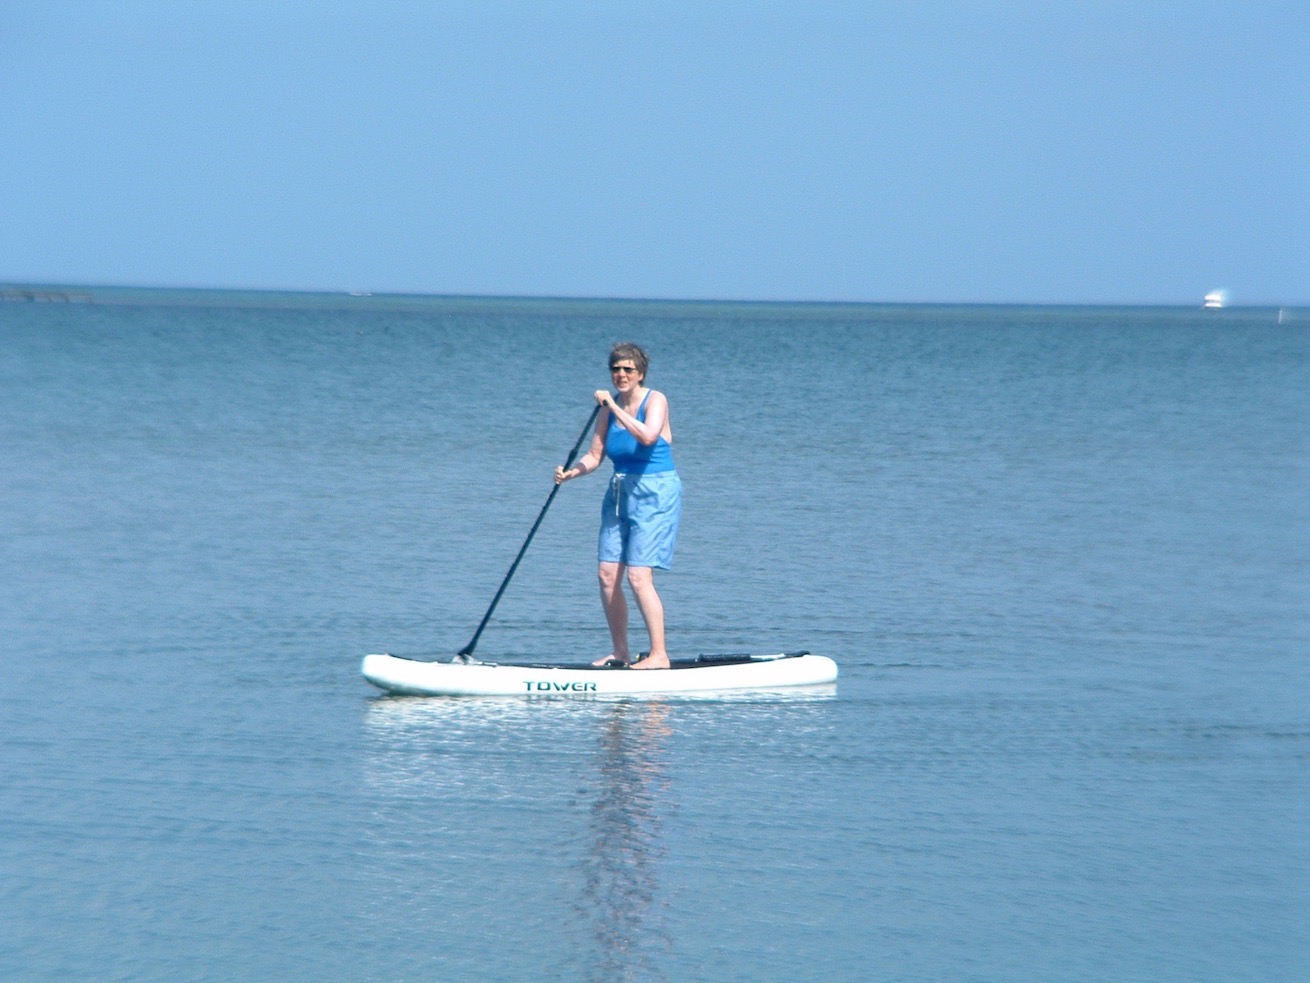 Our new paddle board!